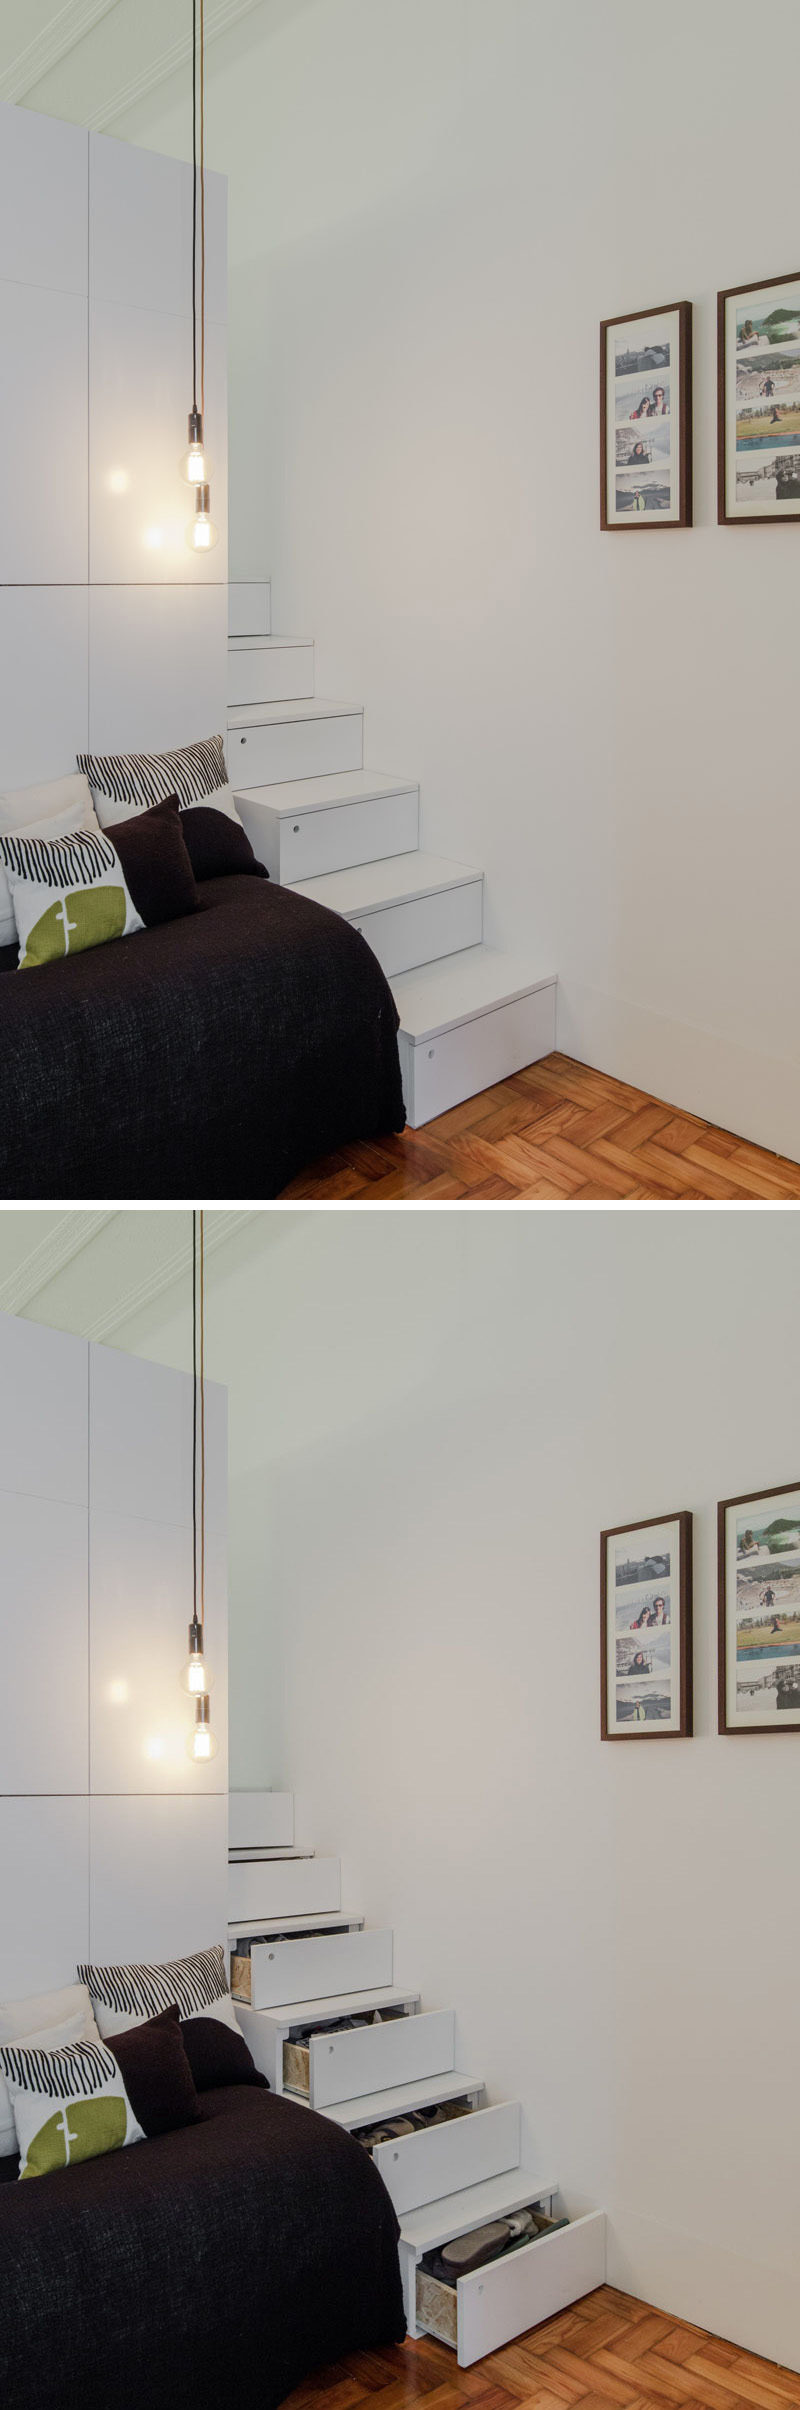 In this small apartment, a set of white stairs sits next to a pull out couch/bed combo, with each step able to be opened as a drawer, providing extra hidden storage.